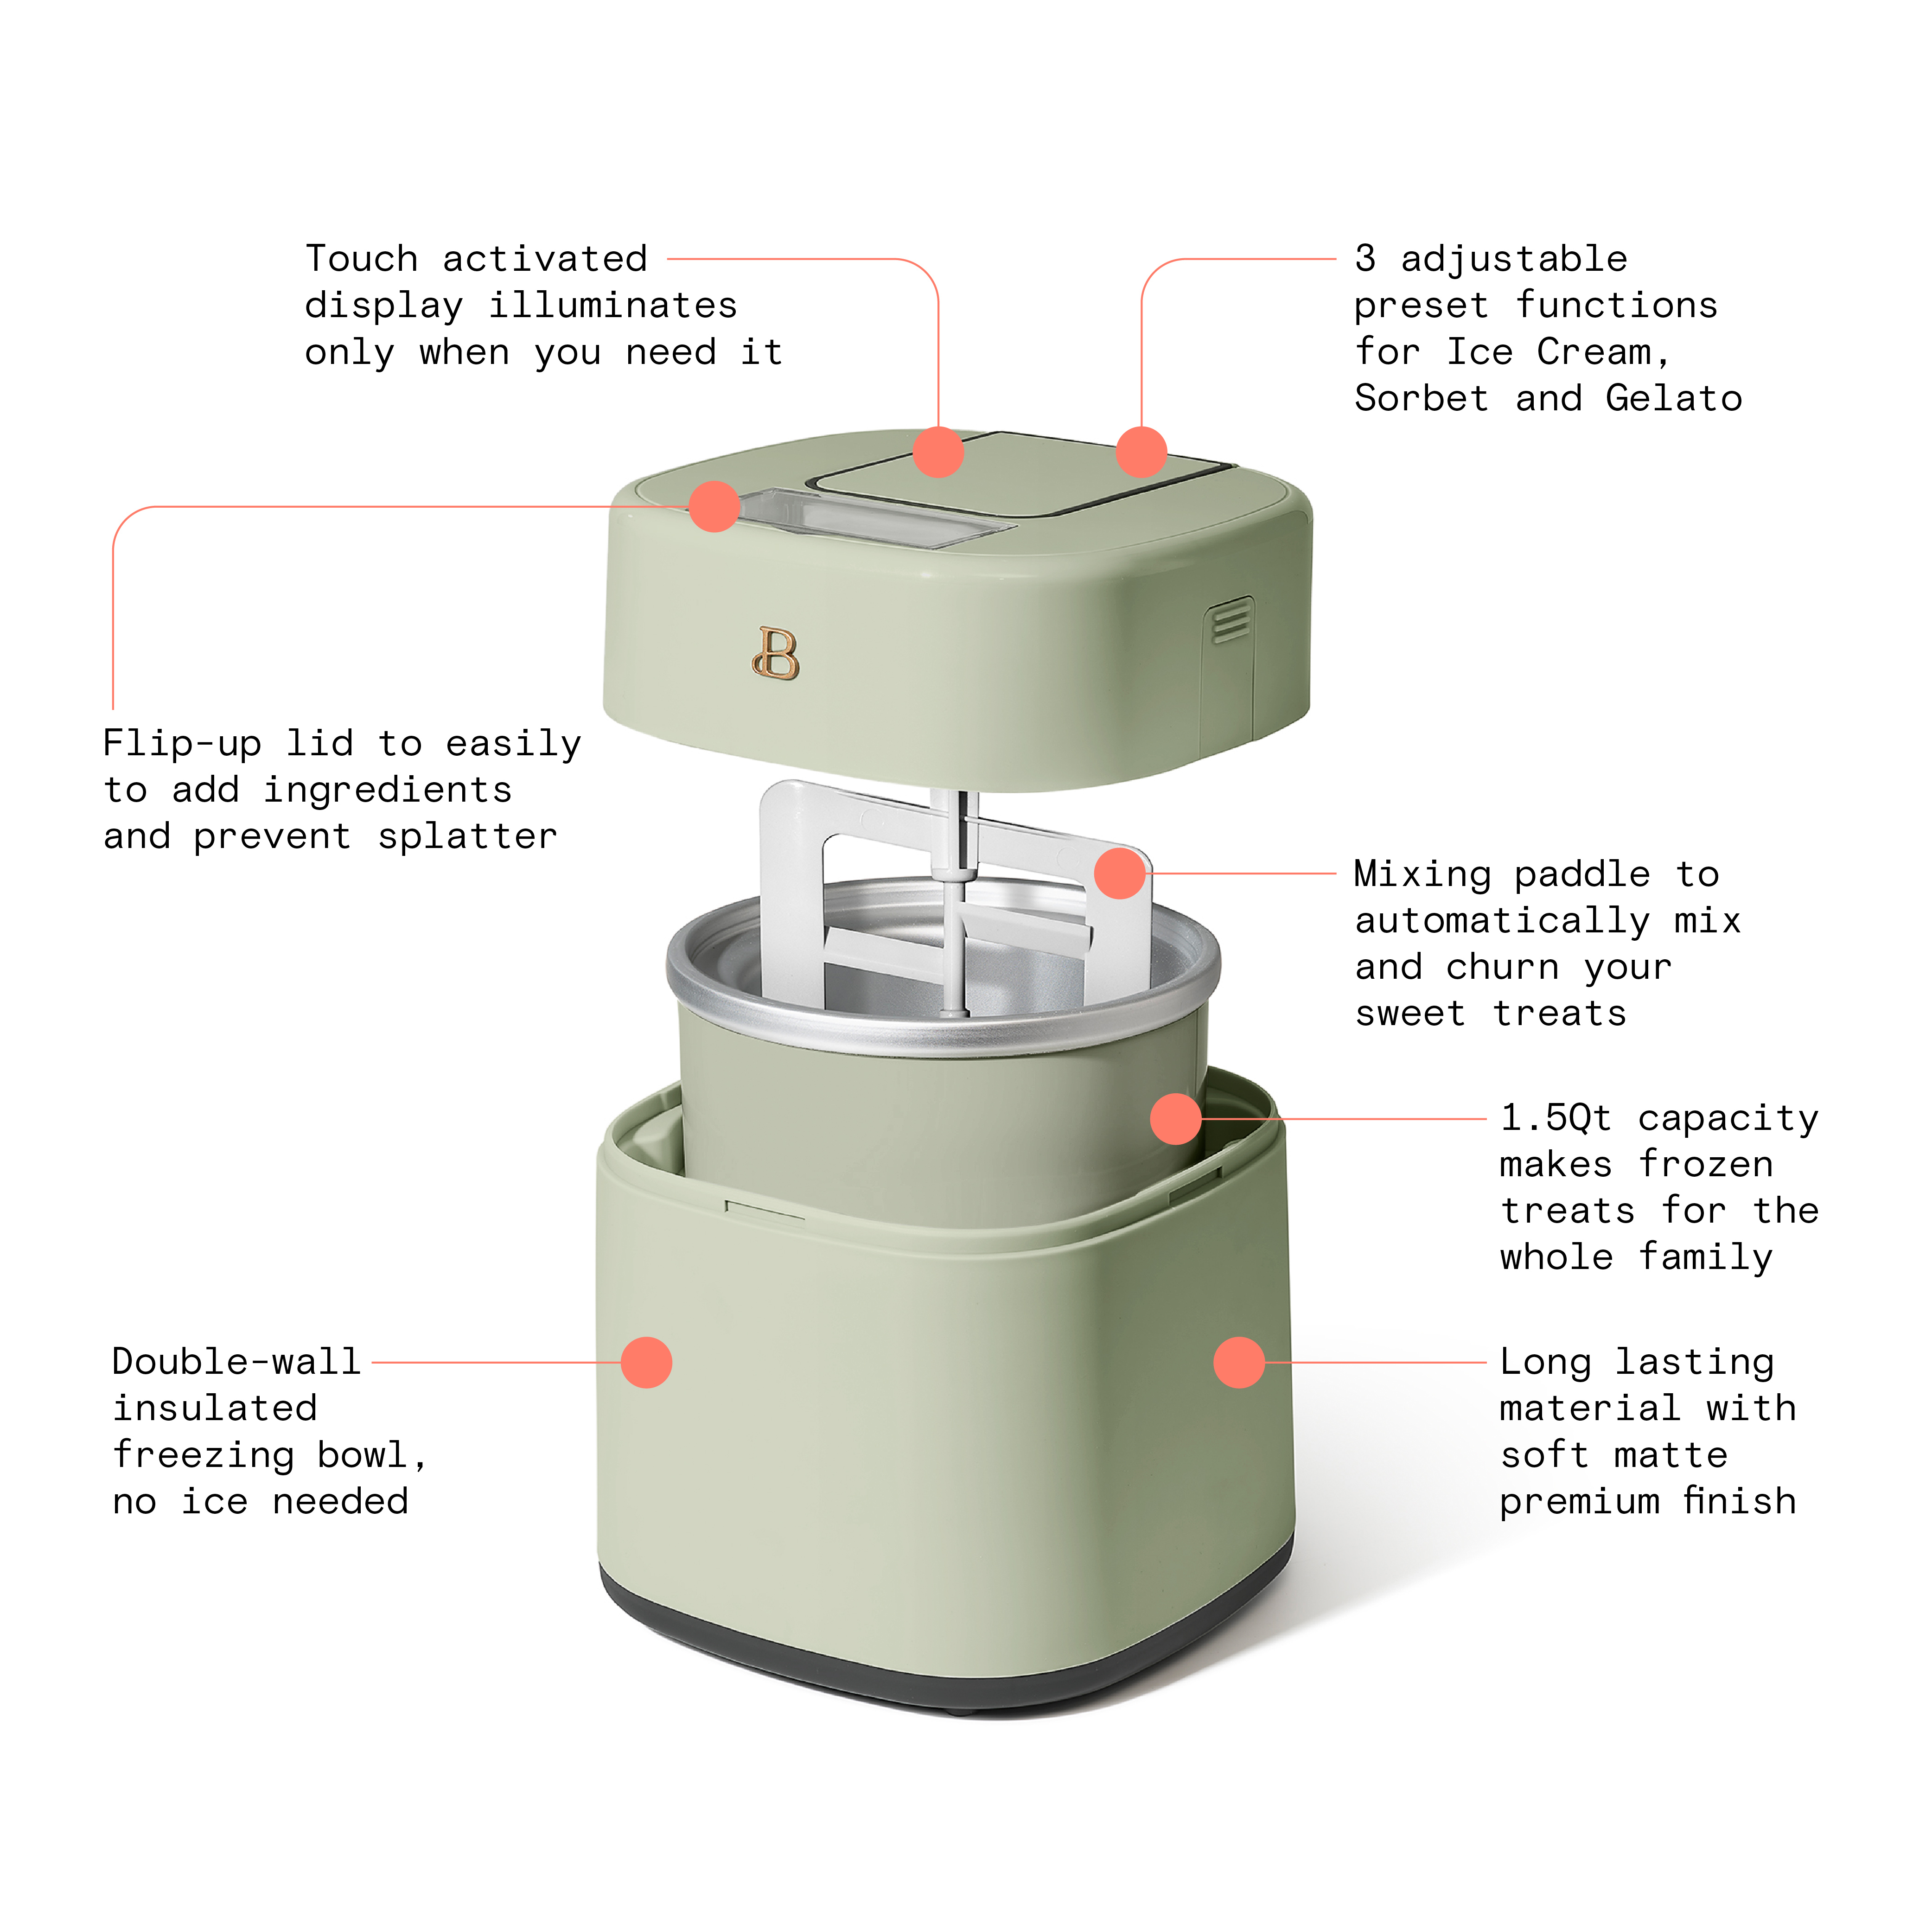 Beautiful 1.5 Qt Ice Cream Maker with Touch Activated Display, Sage Green by Drew Barrymore - image 4 of 13